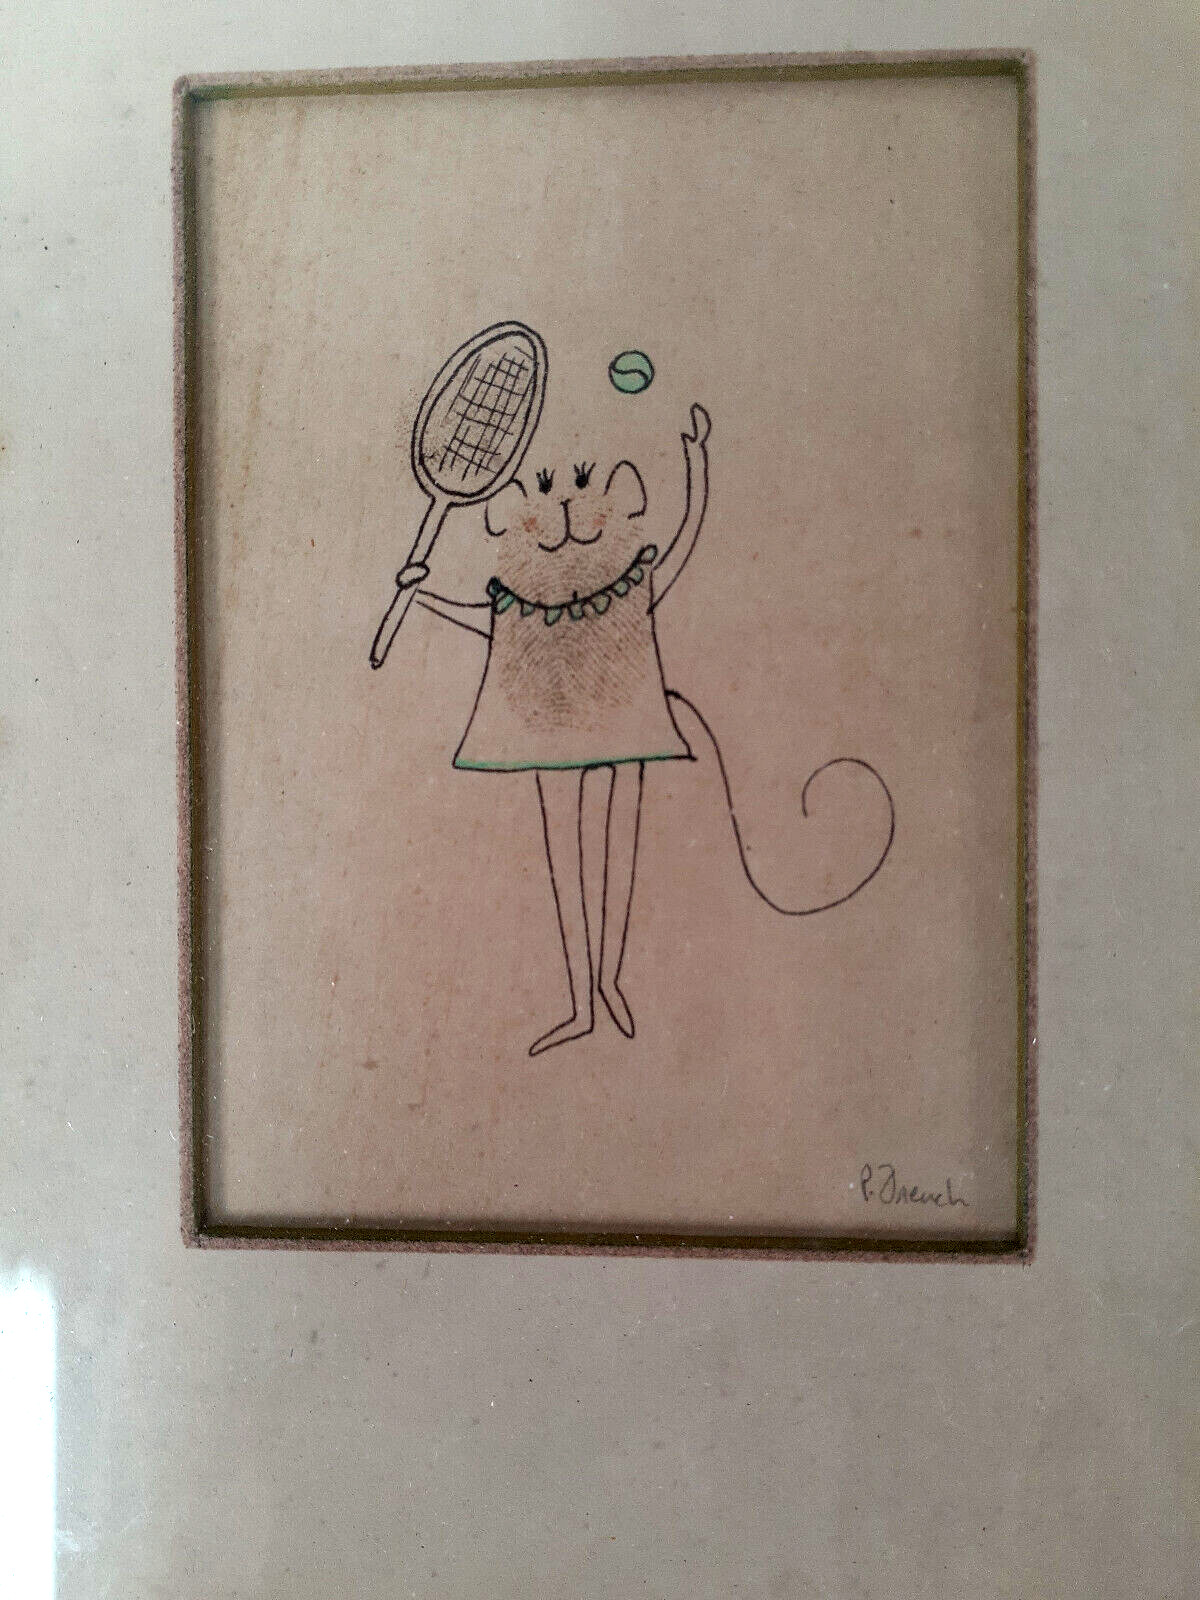 Vintage Miniature Fingerprint Painting of a Mouse with Tennis Racket.P. French